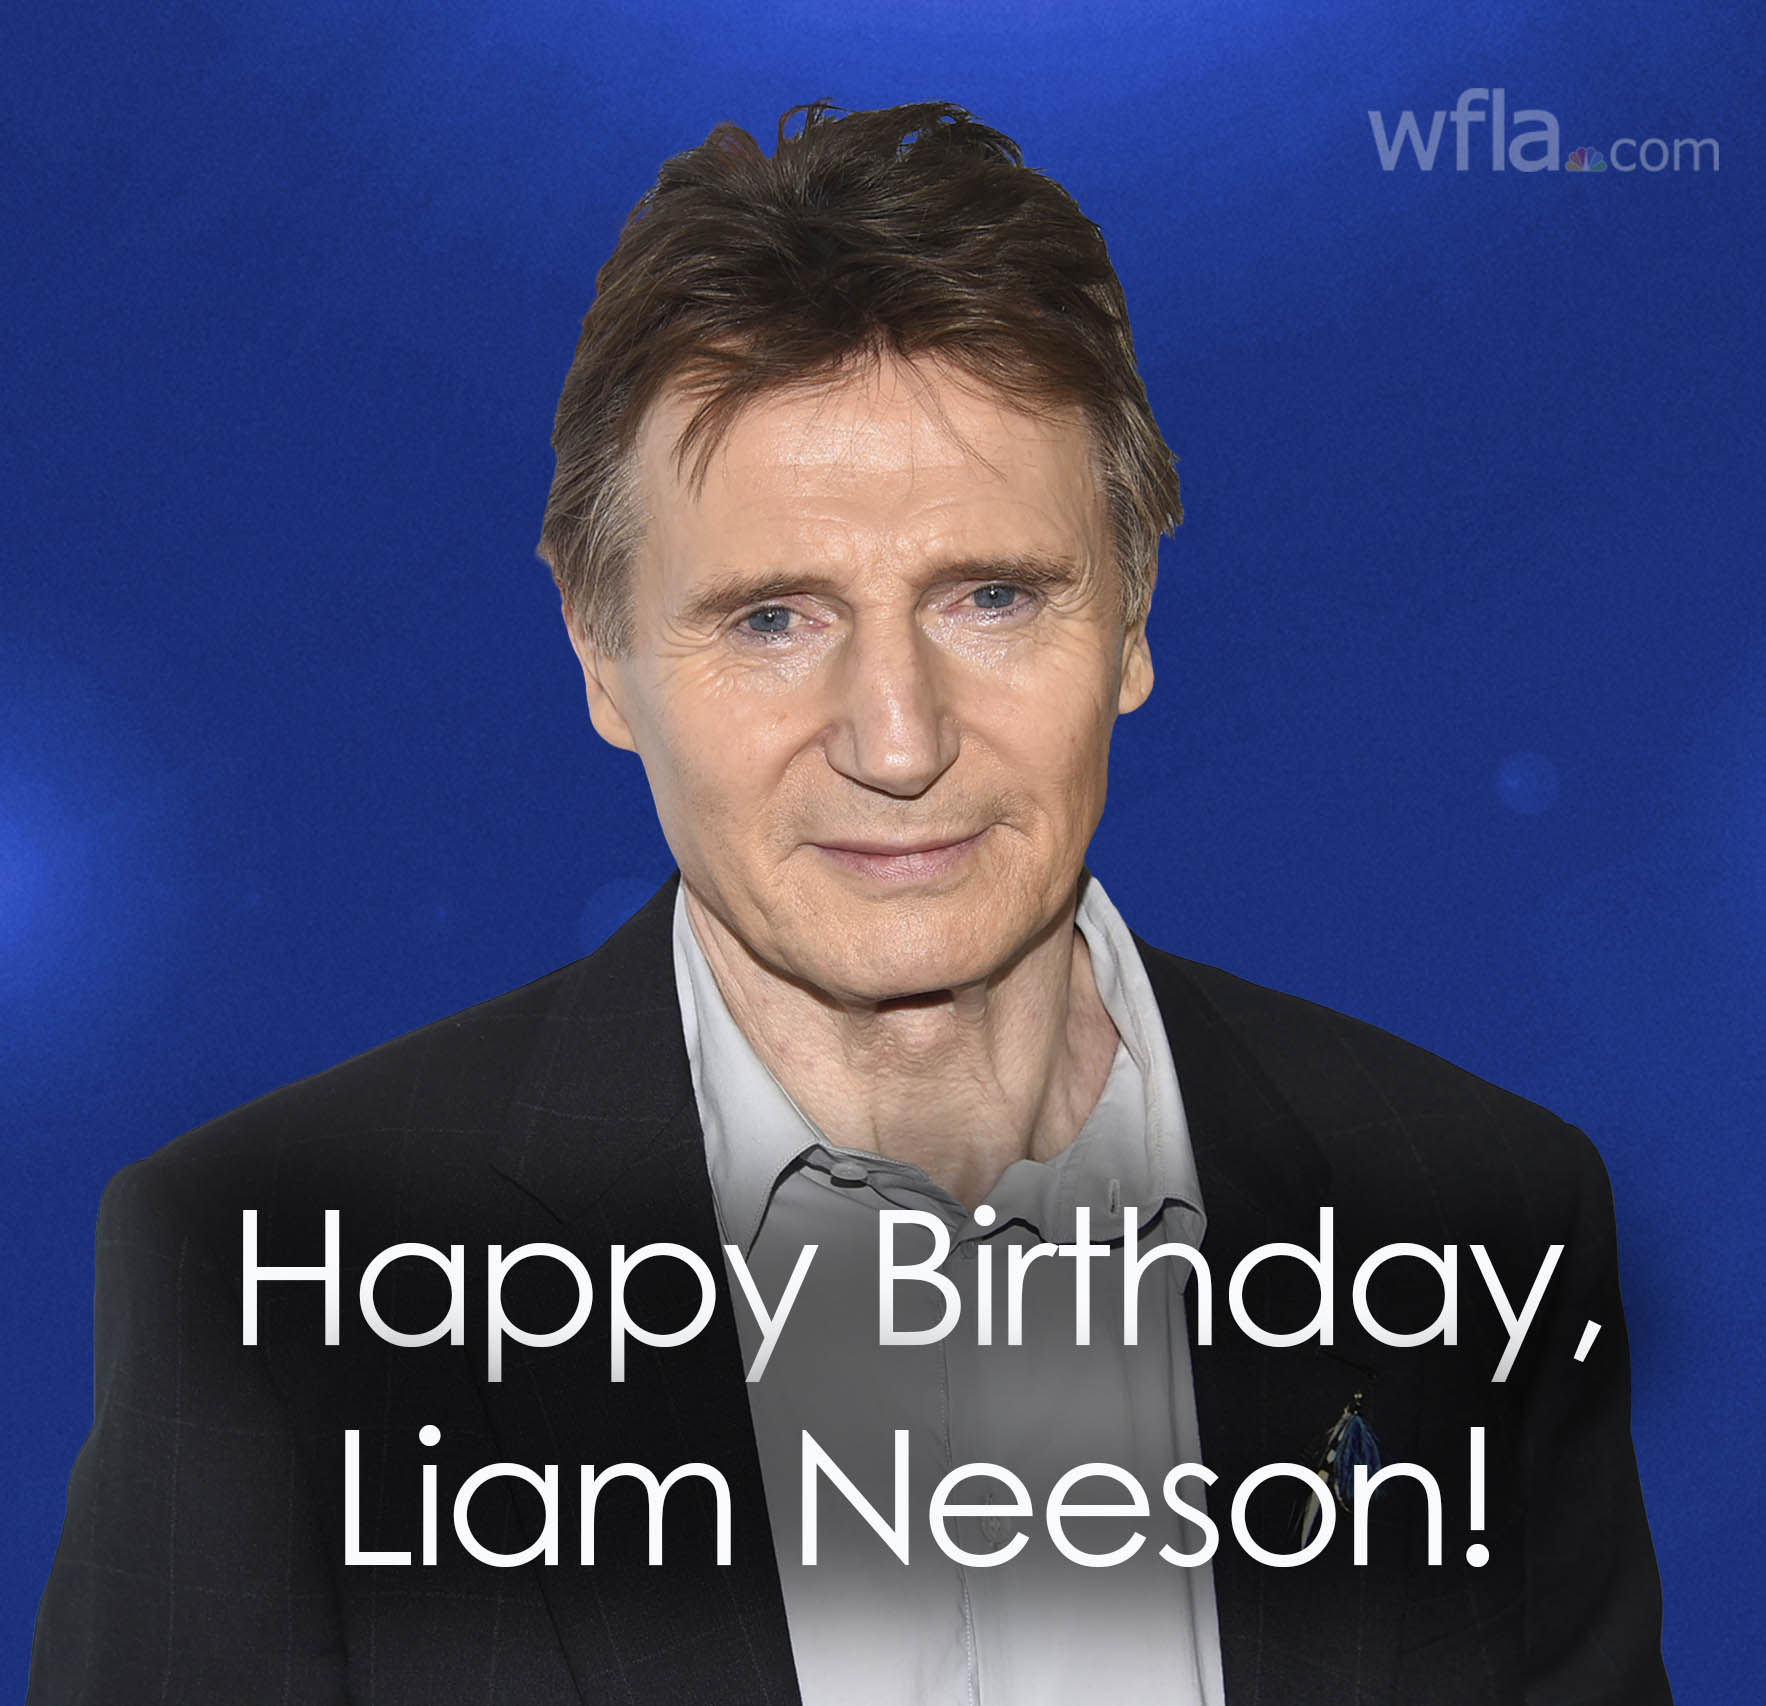 HAPPY BIRTHDAY Join us in wishing a happy 70th birthday to actor Liam Neeson.  